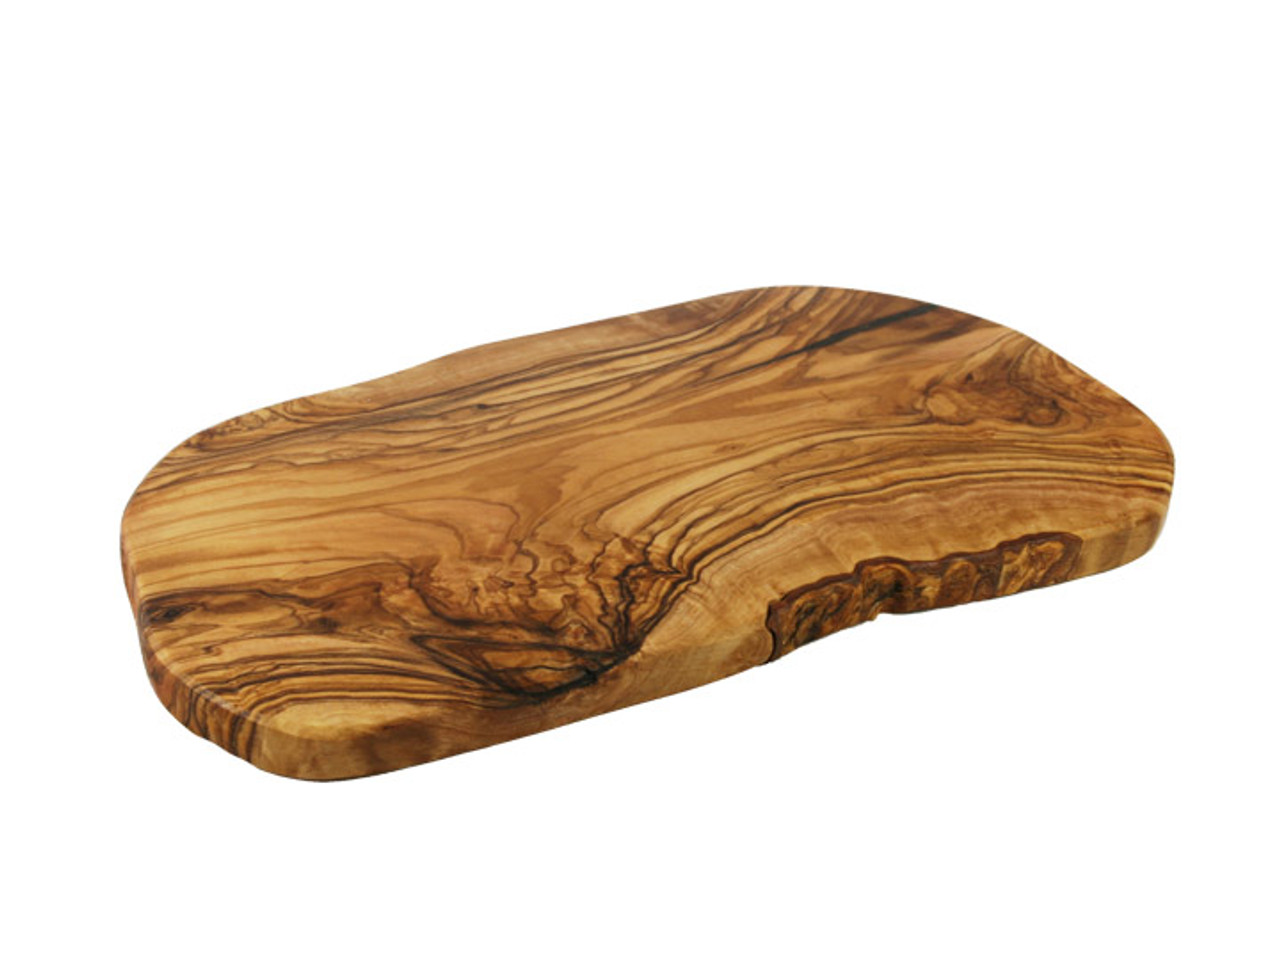 Naturally Med Olive Wood Cutting Board/Cheese Board, 16